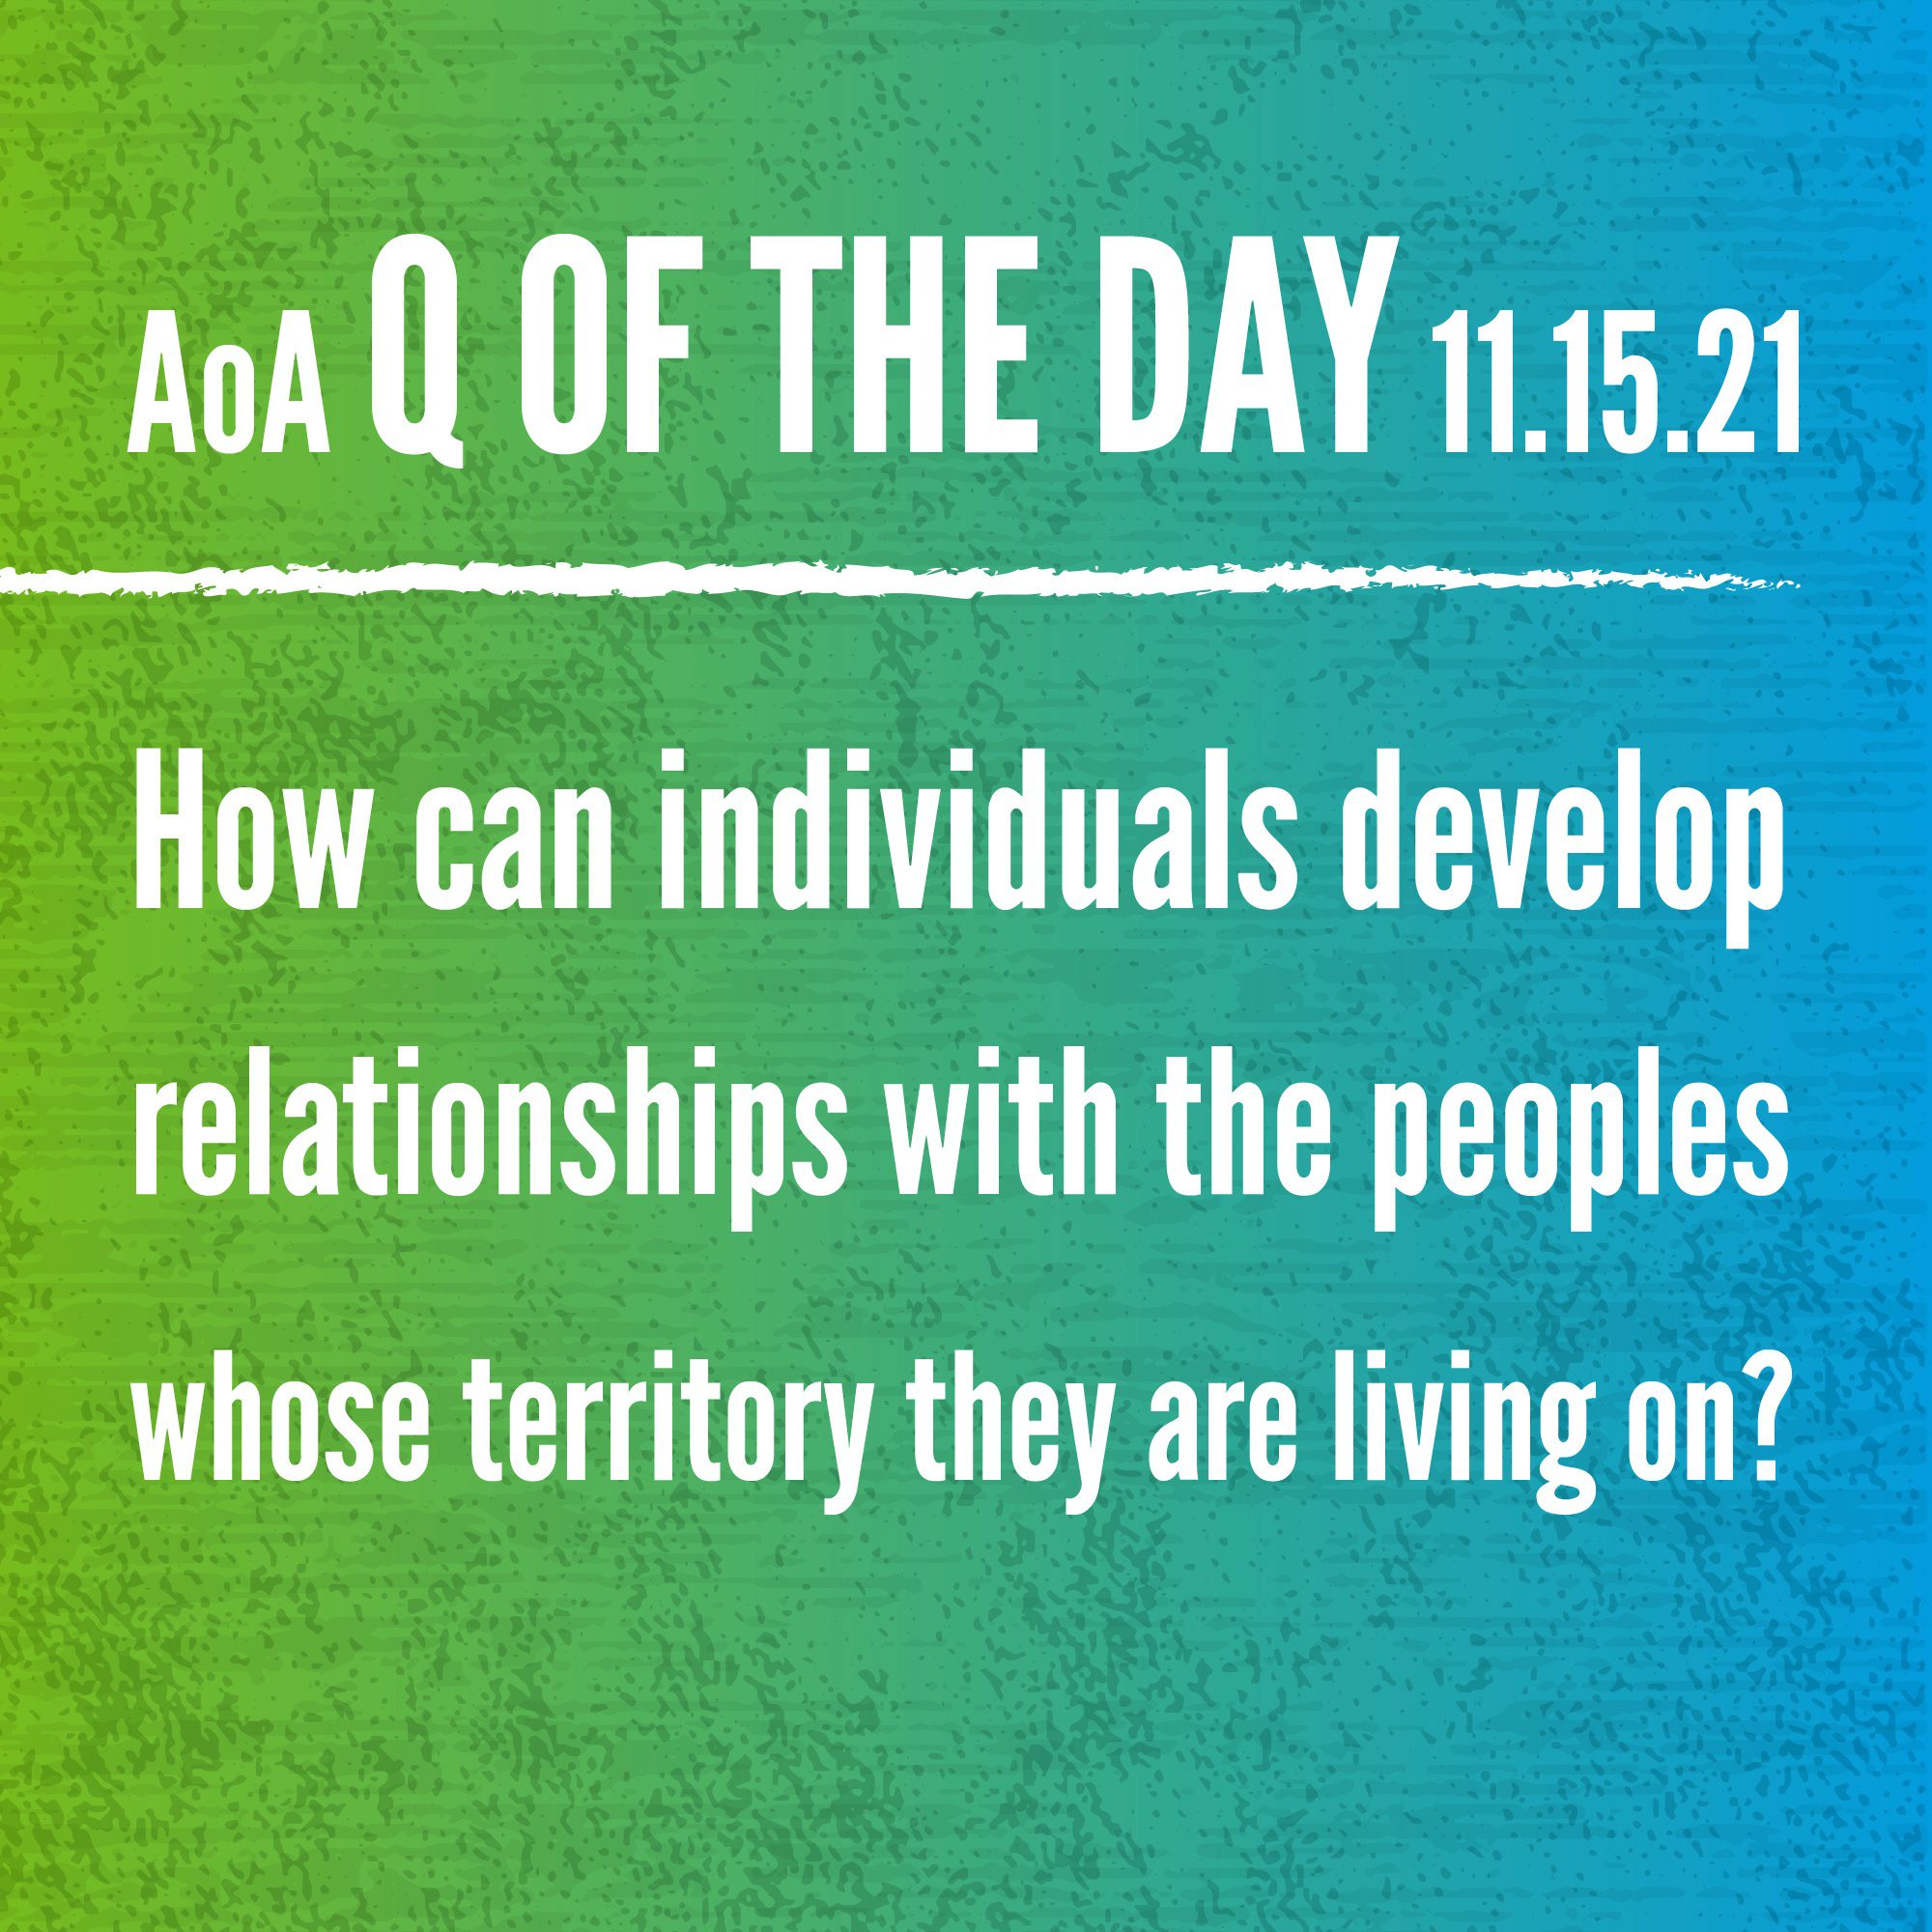 AoA Q of the Day November 15, 2021: How can individuals develop relationships with the peoples whose territory they are living on?